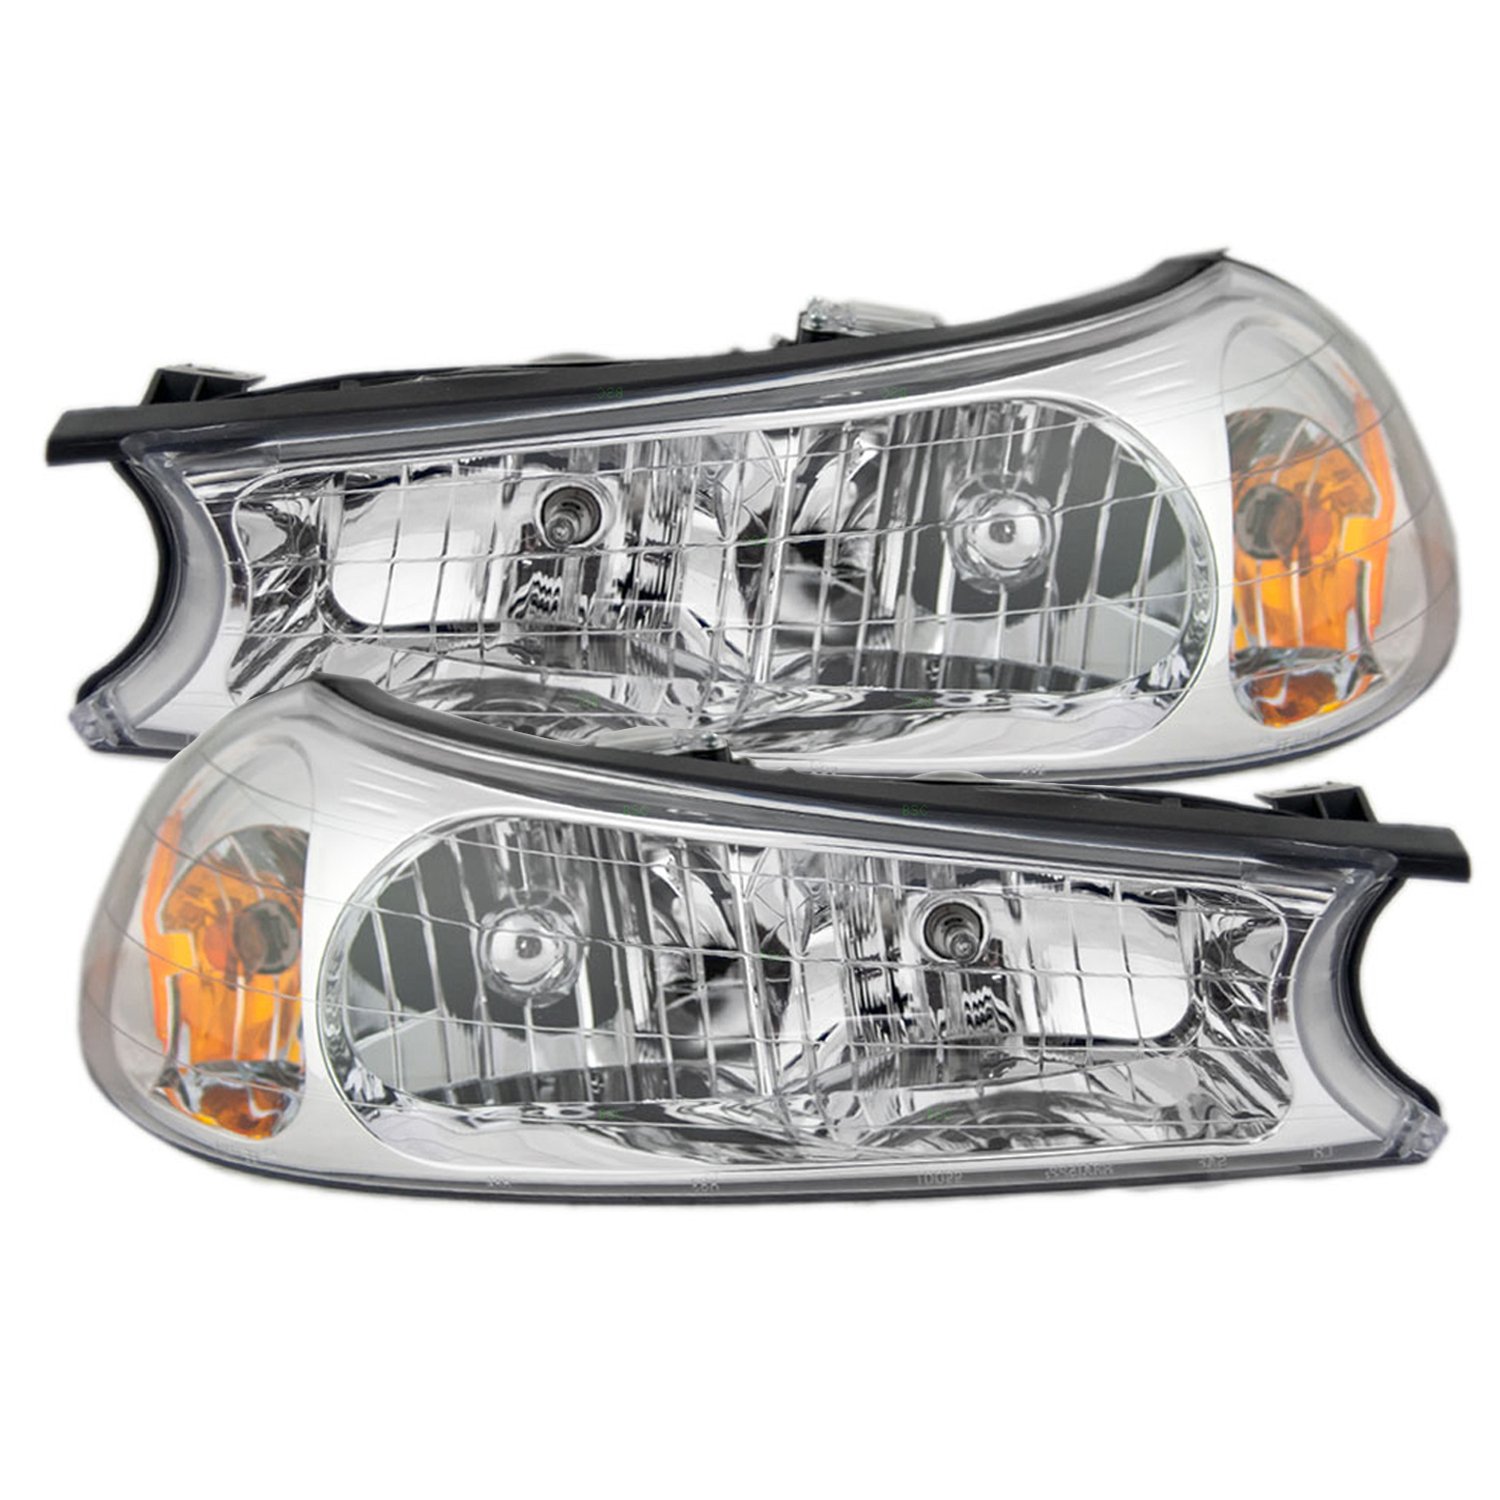 Driver Replacement Front Headlight with Bulbs Fleetwood Revolution 2002-2007 RV Motorhome Left 